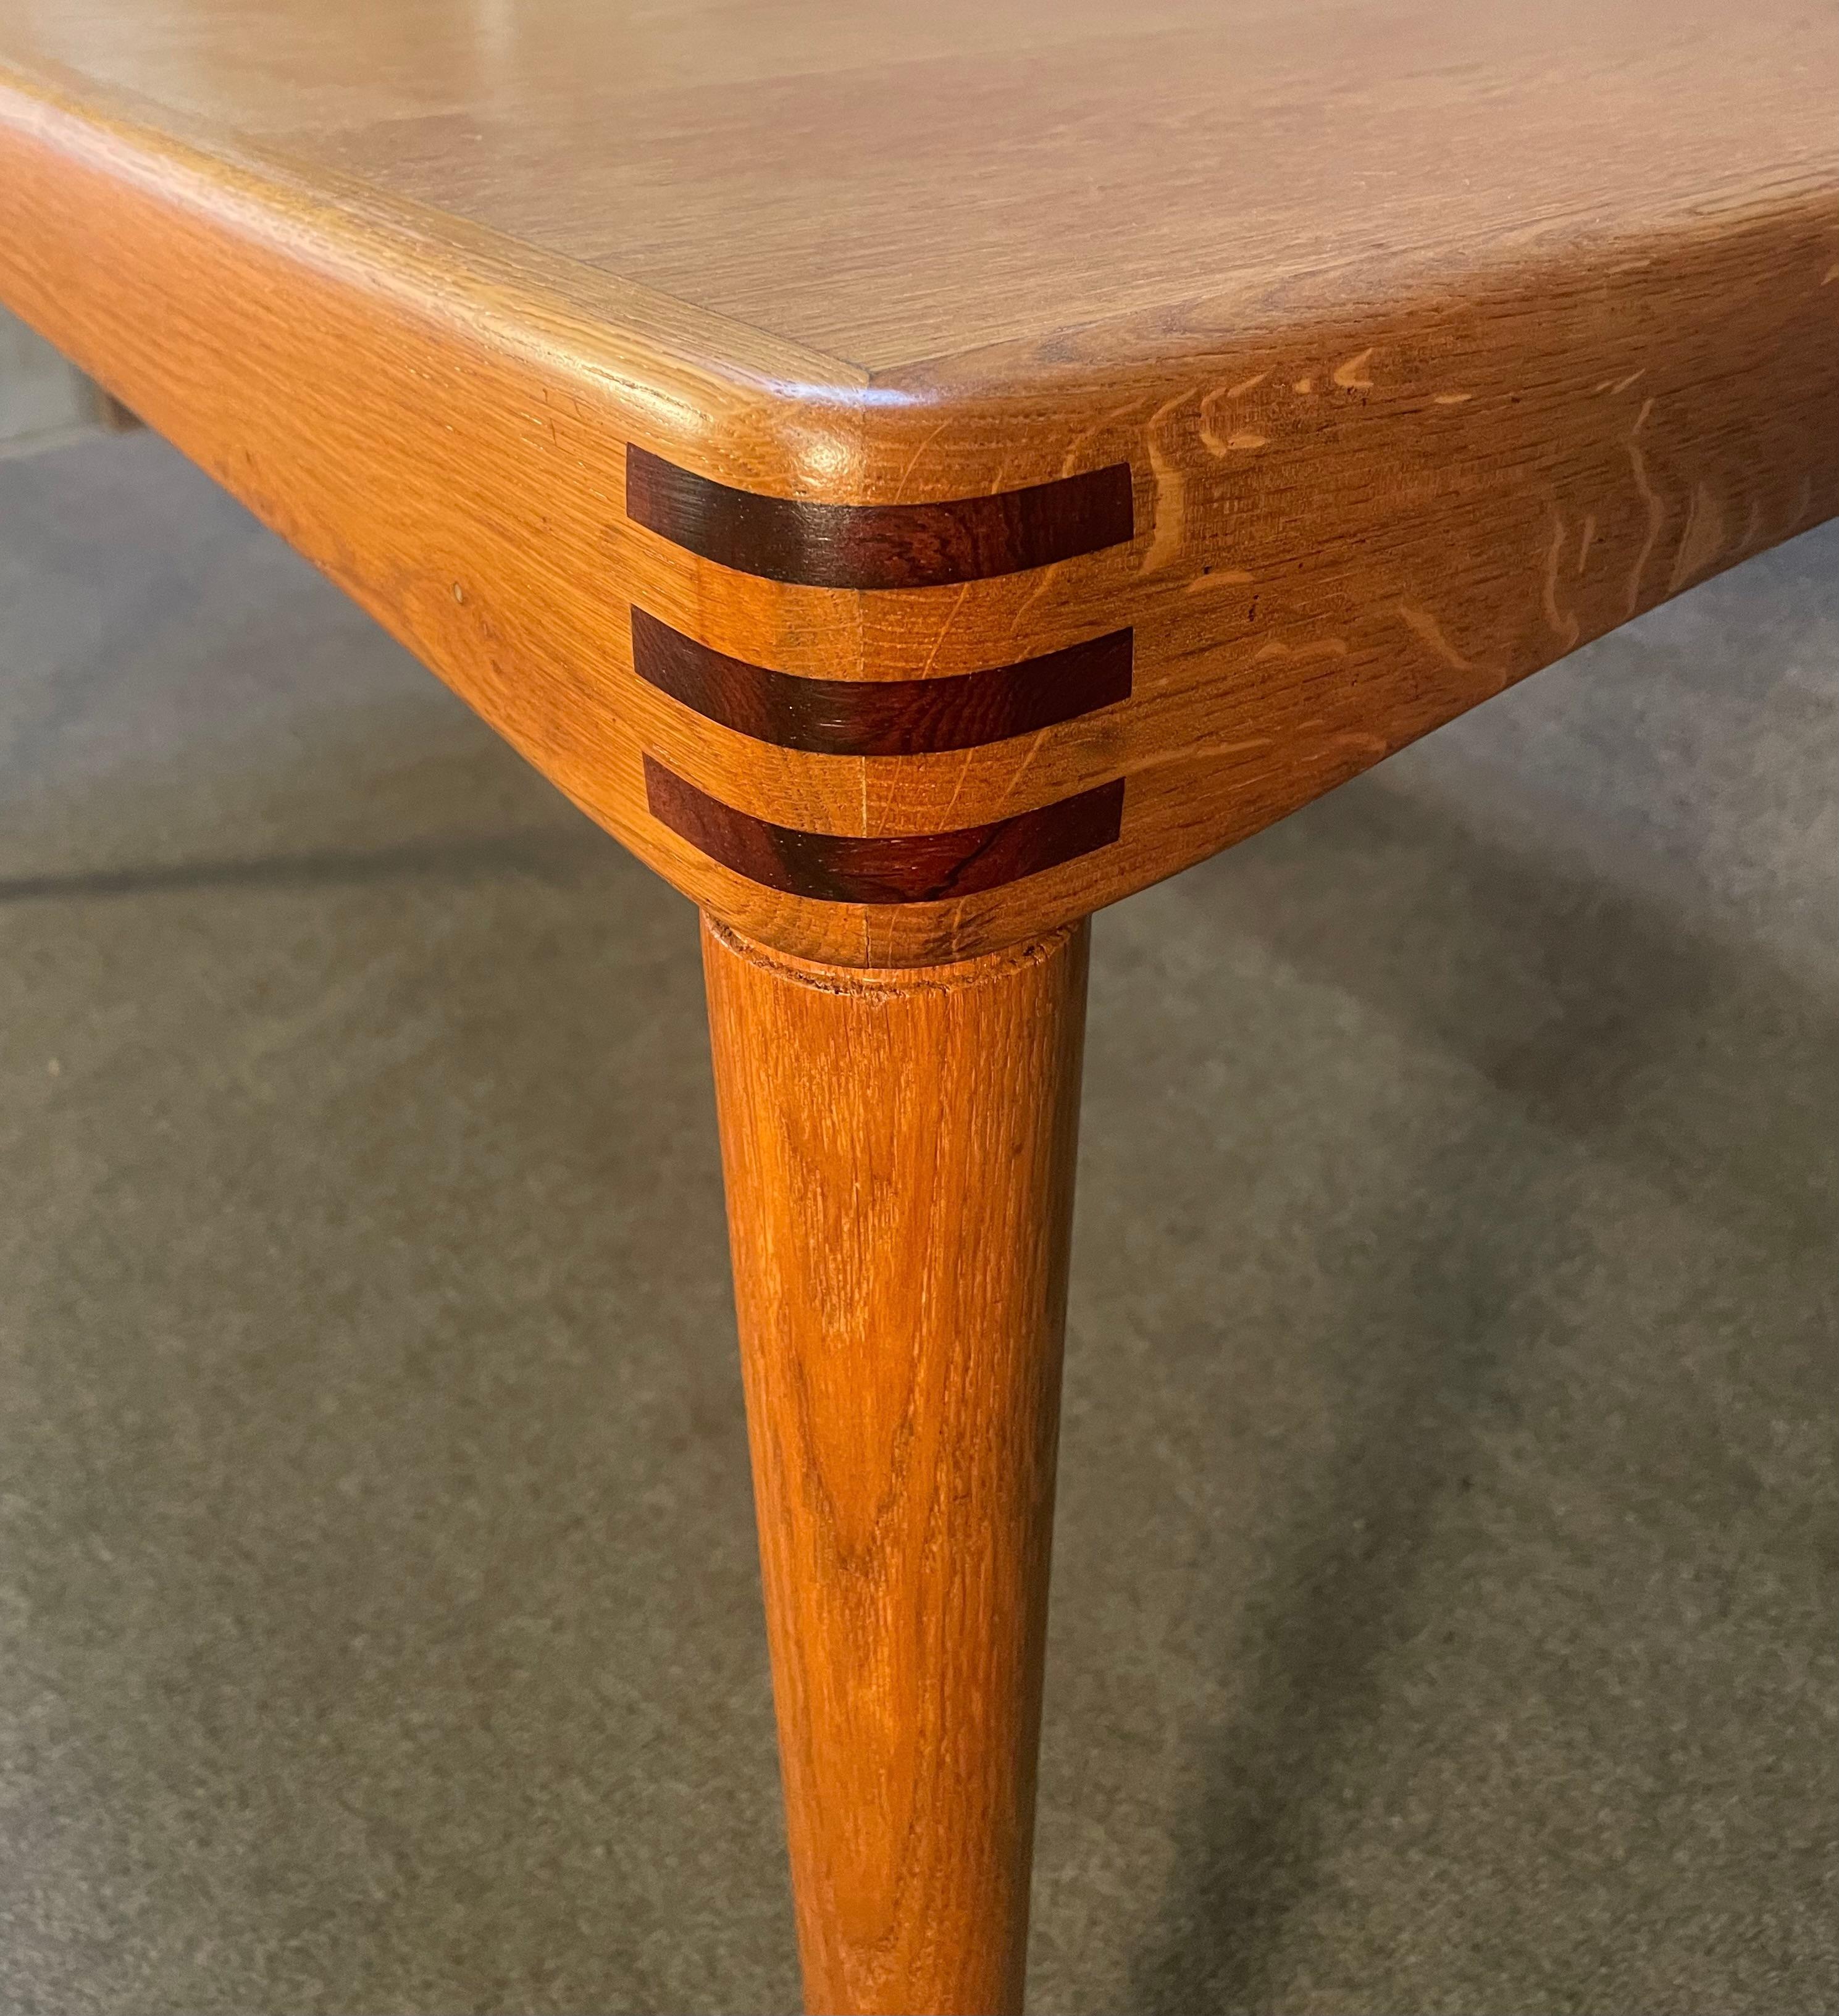 Vintage Danish Mid-Century Modern Oak Dining Table by h.w. Klein for Bramin In Good Condition For Sale In San Marcos, CA